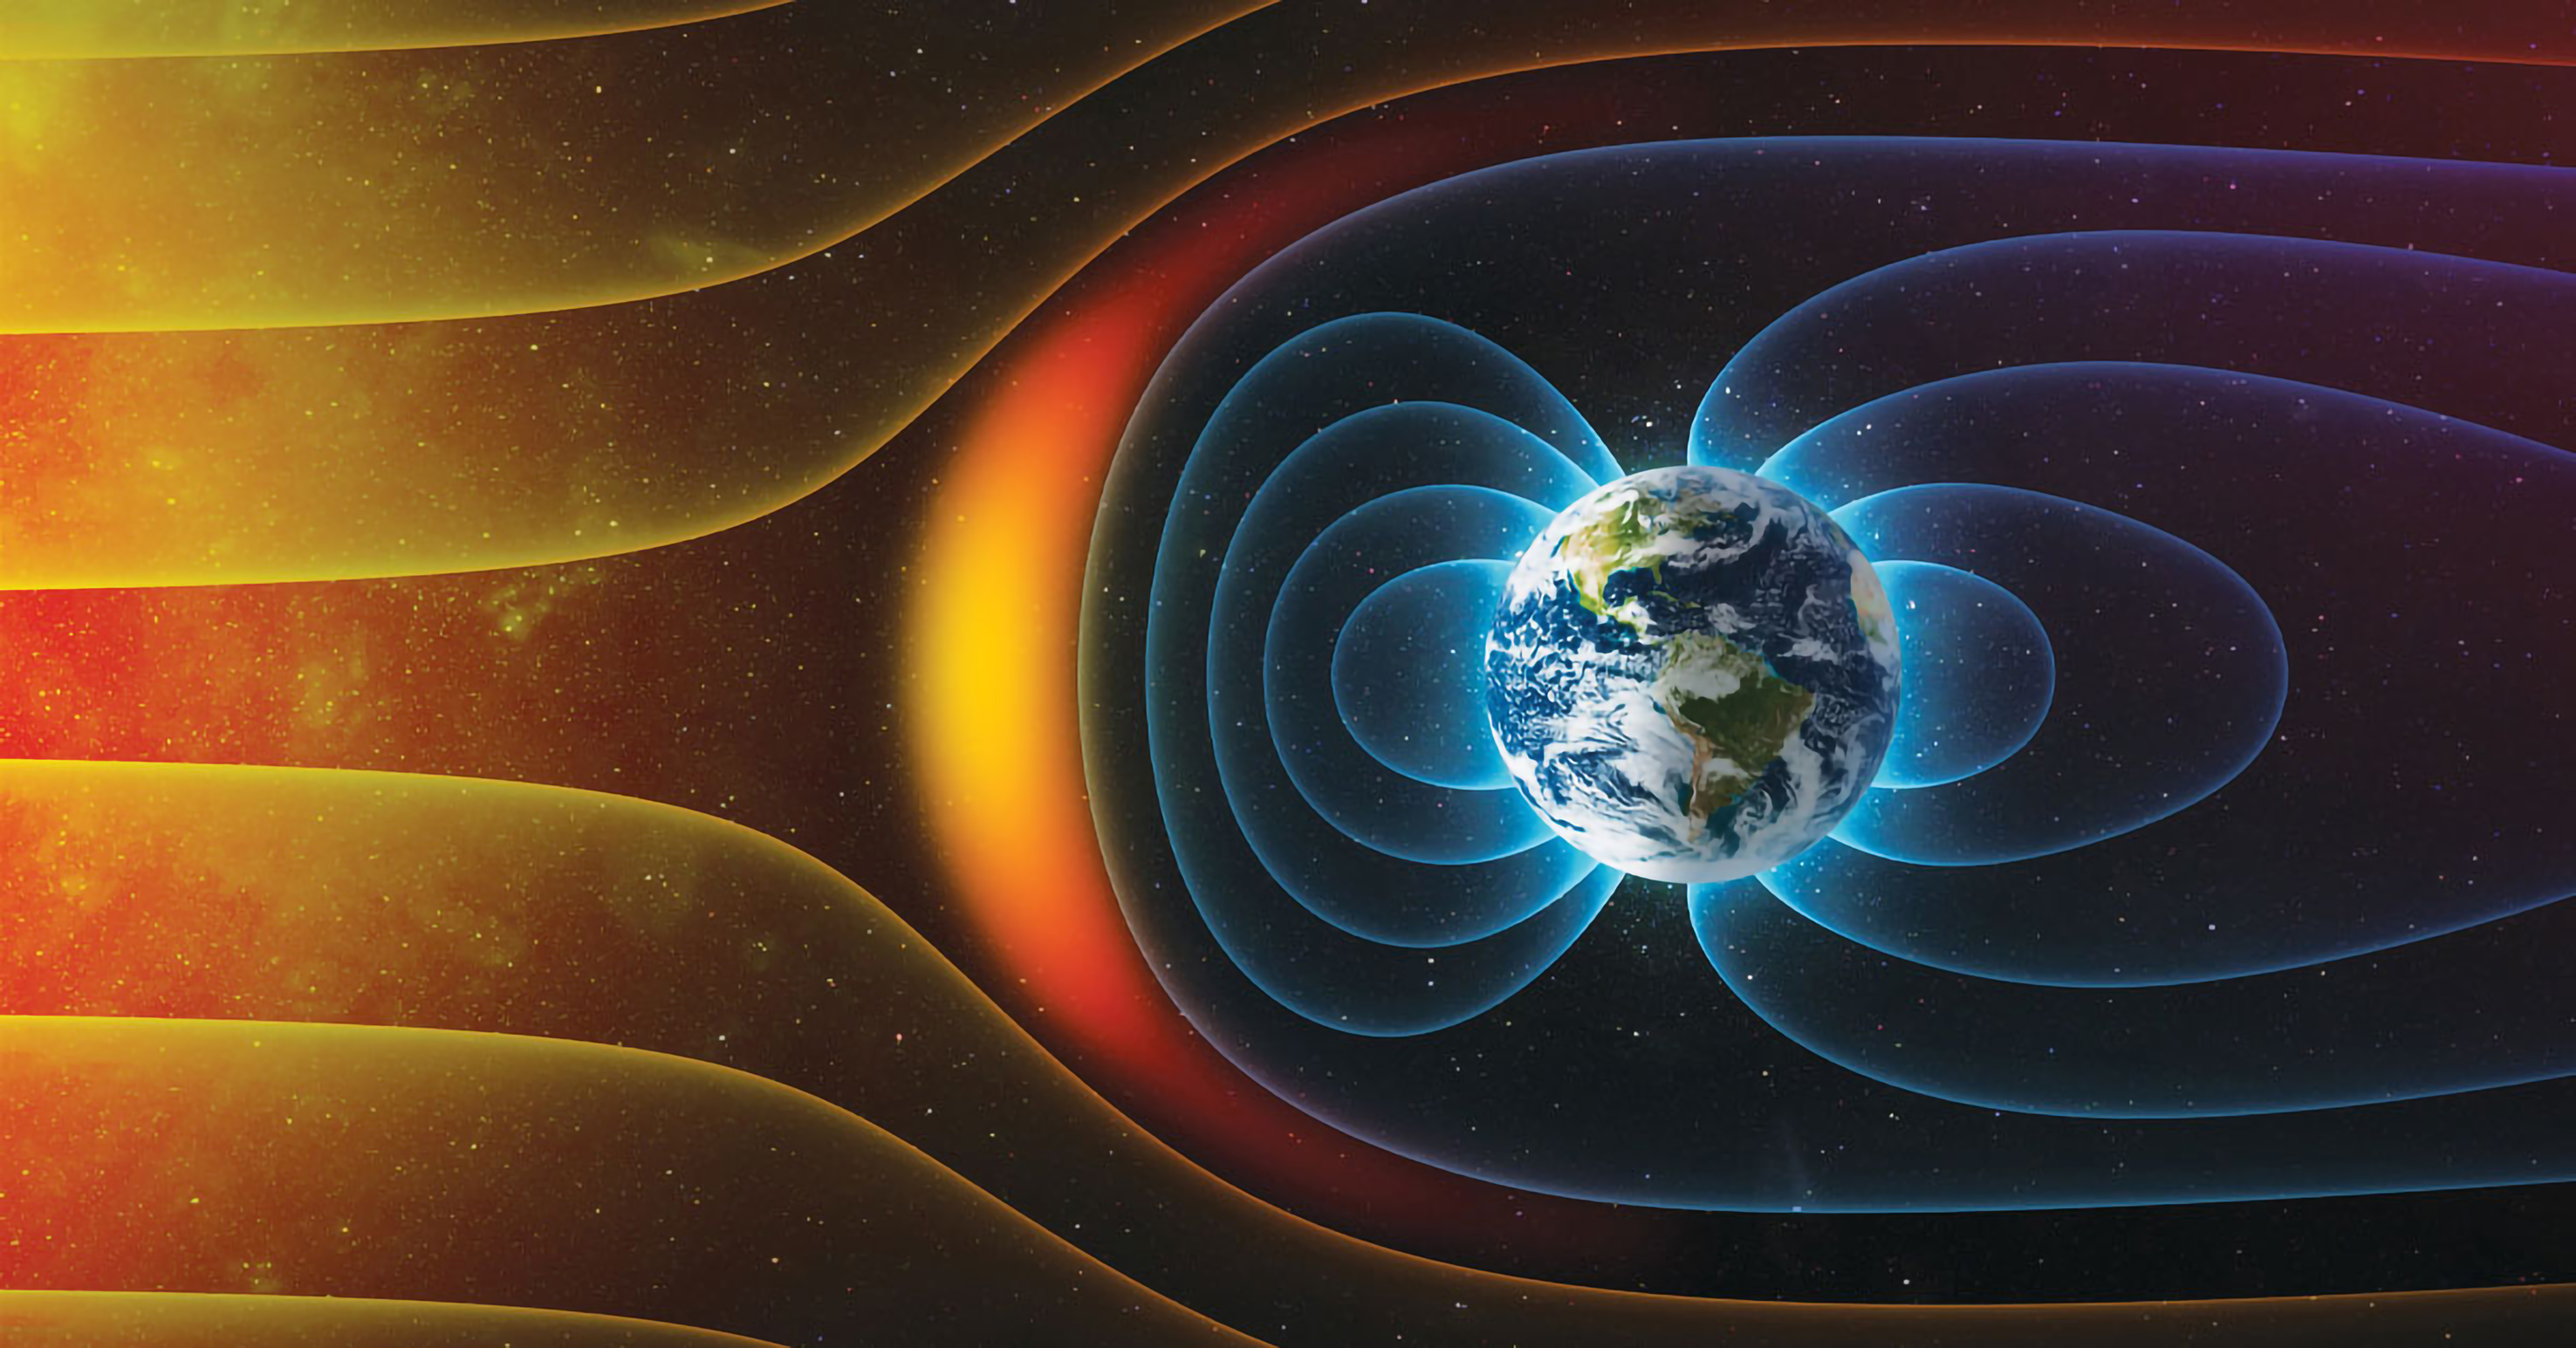 A graphic visualization of the solar wind, shown in yellows and oranges, running up against the Earth's magnetosphere. Earth's magnetic field lines are shown, with the bow shock emphasized.